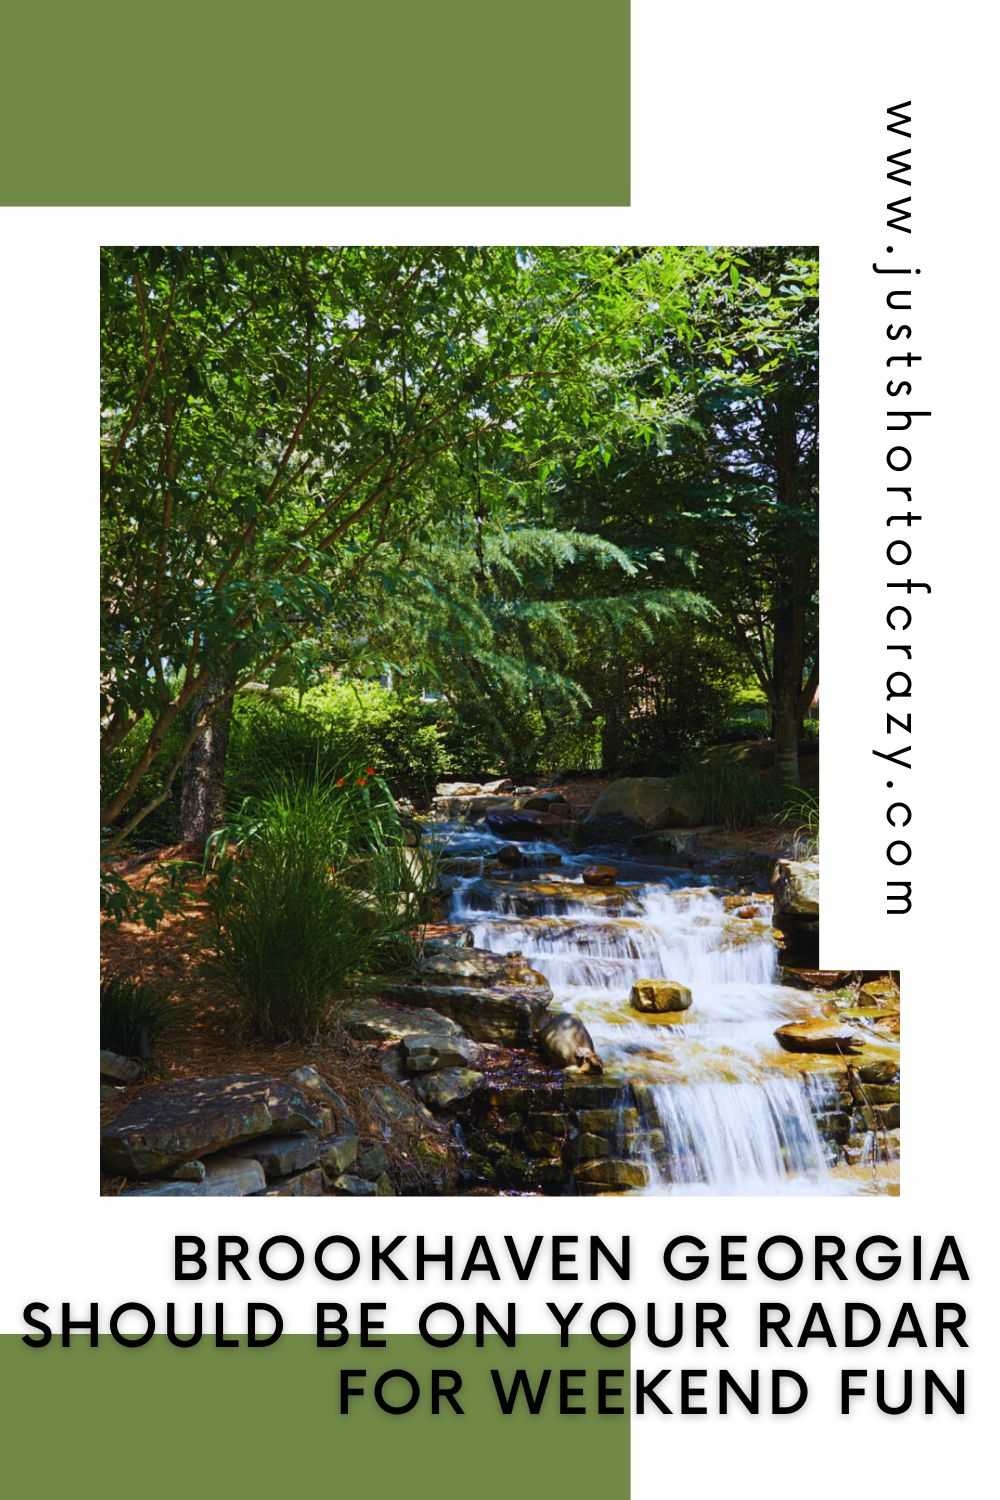 10 Reasons Why Brookhaven Georgia Should Be On Your Radar For Weekend Fun -  Just Short of Crazy